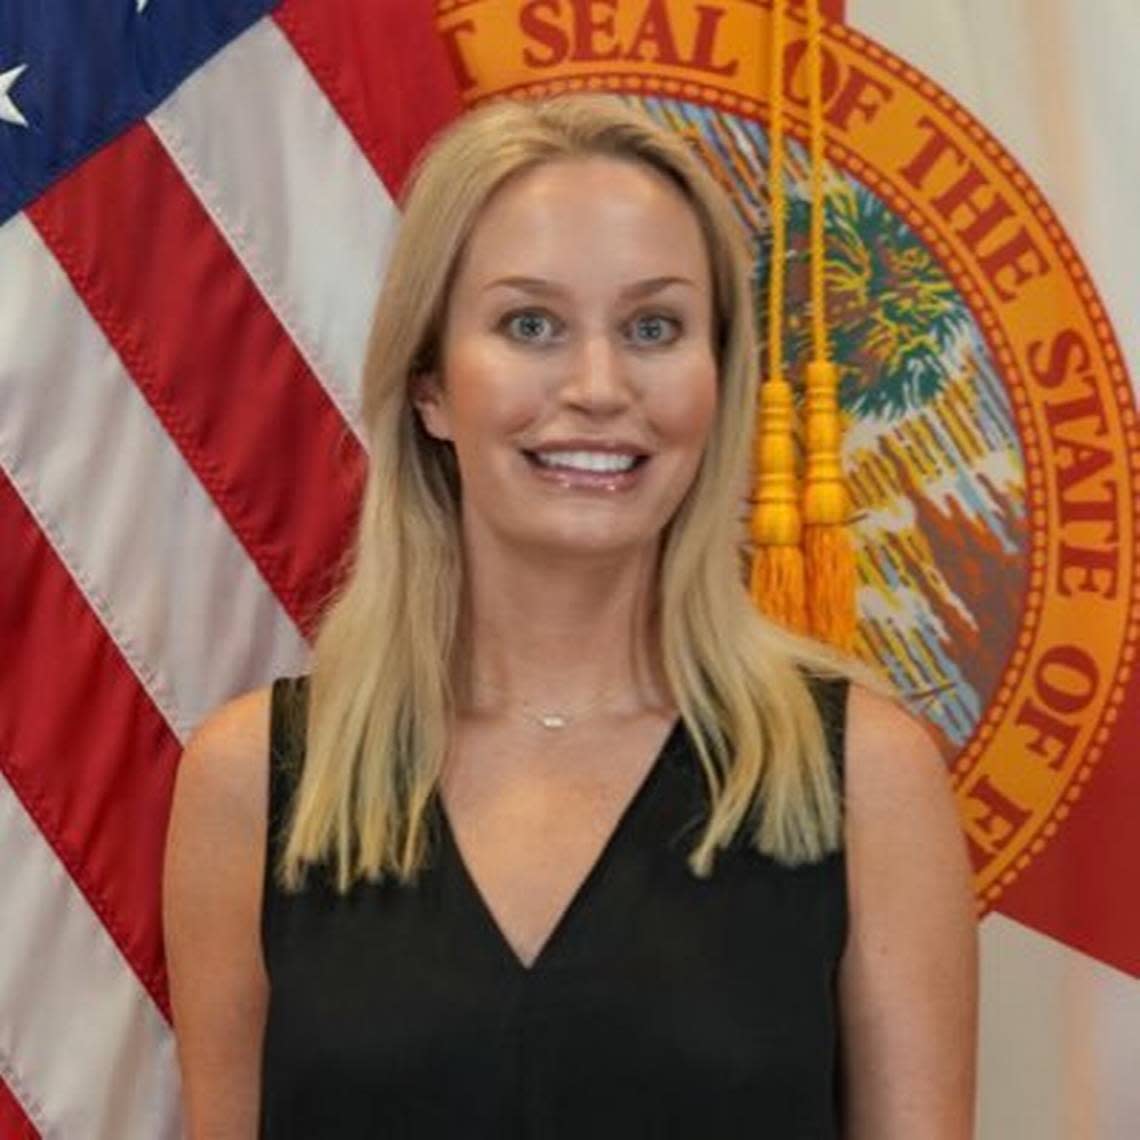 This is a photo of Christina Pushaw from her Twitter account, which she uses to advocate for Florida Gov. Ron DeSantis.